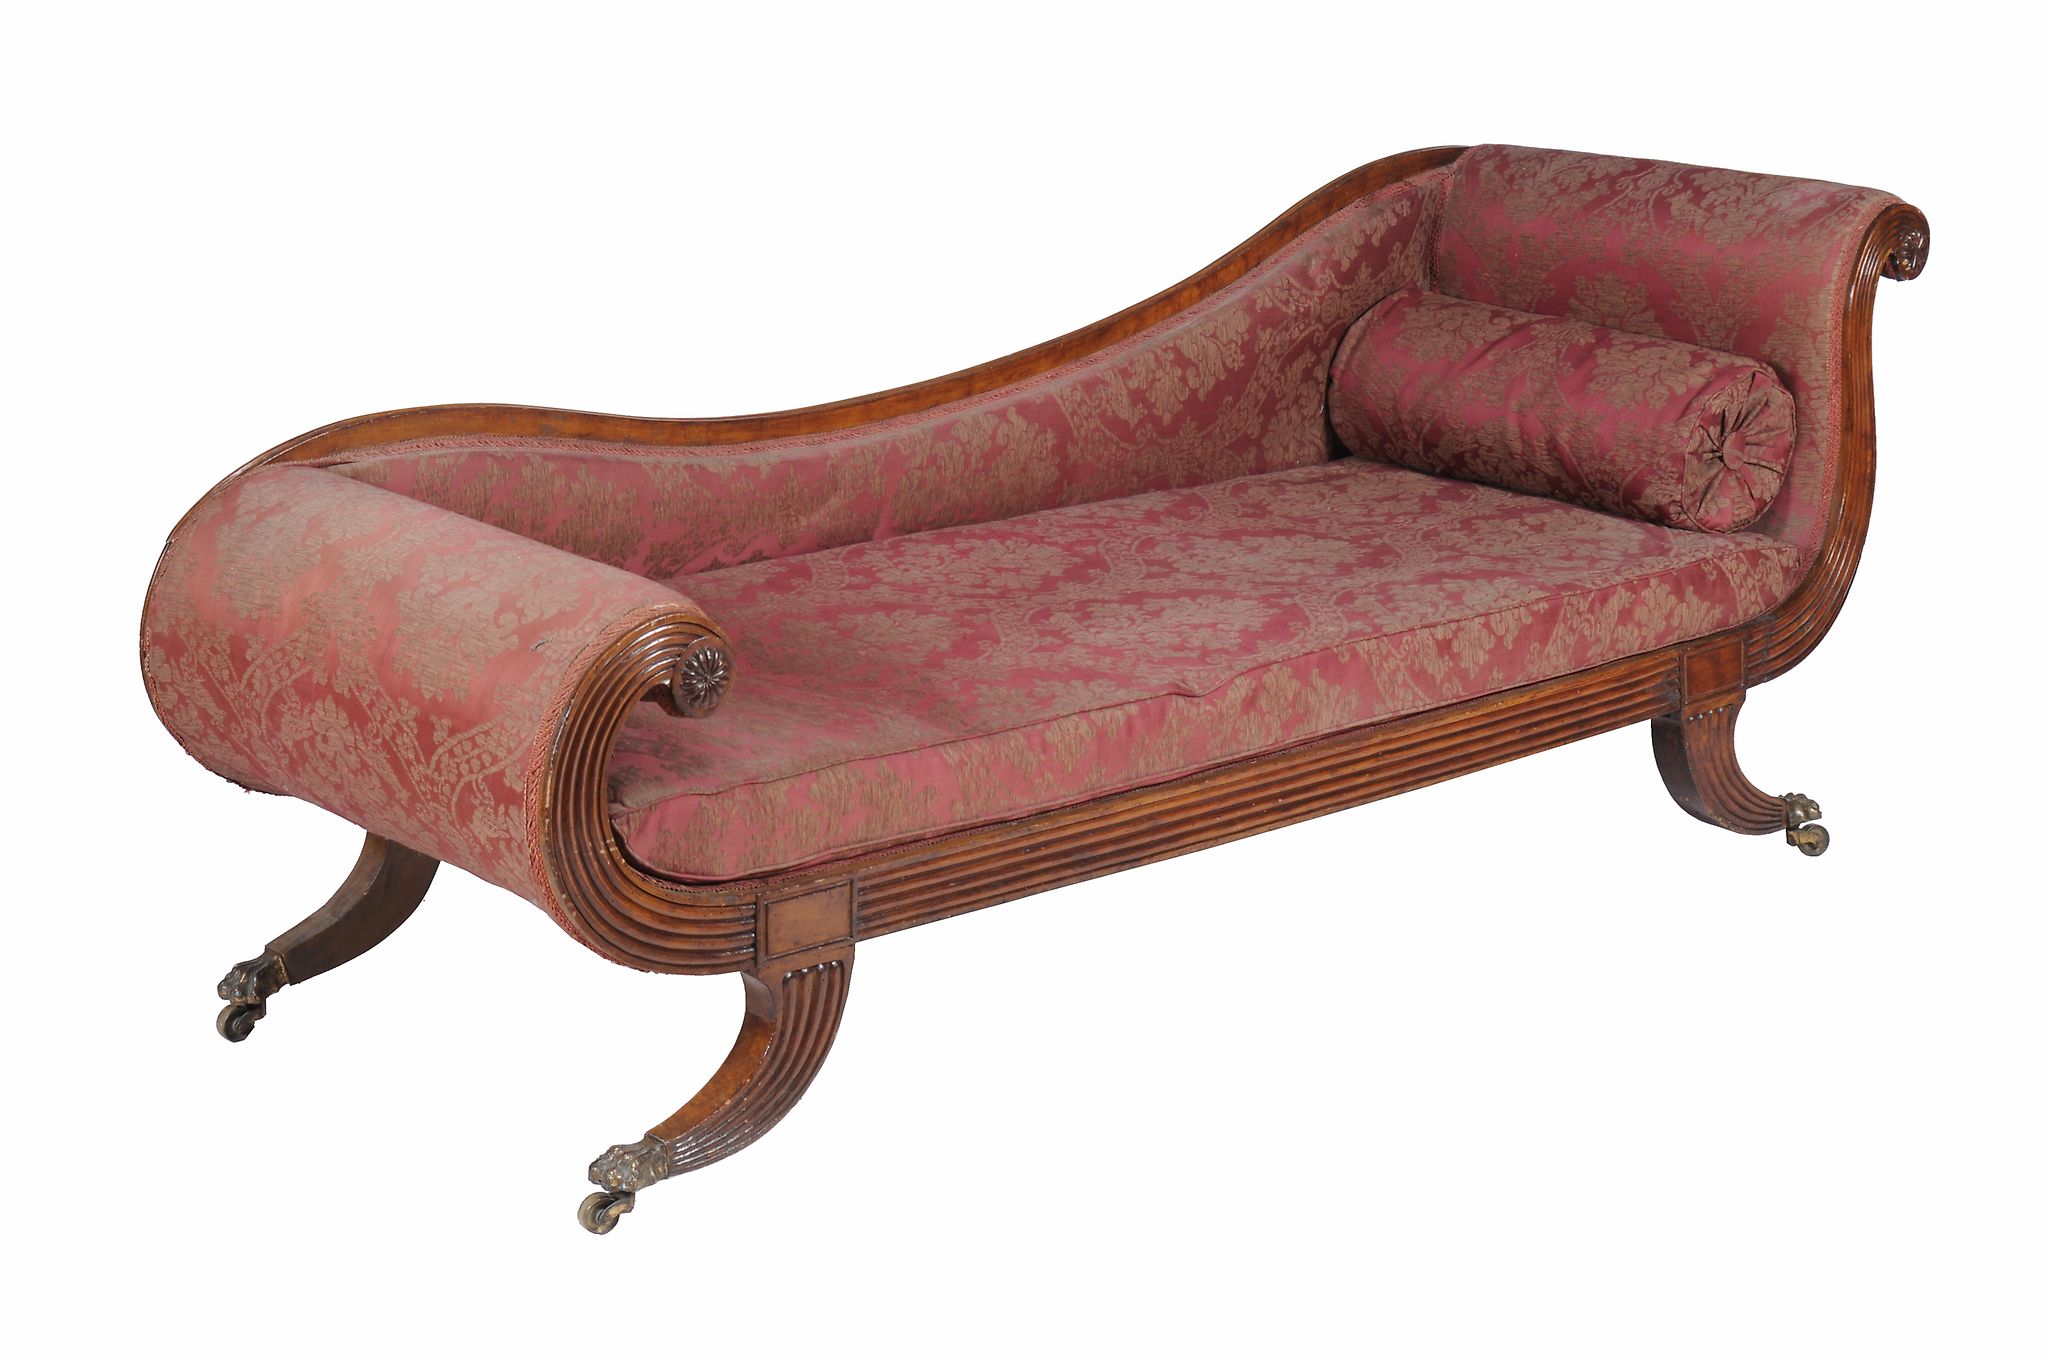 A George IV mahogany chaise longue , circa 1825, in the manner of Gillows, with scrolled ends and